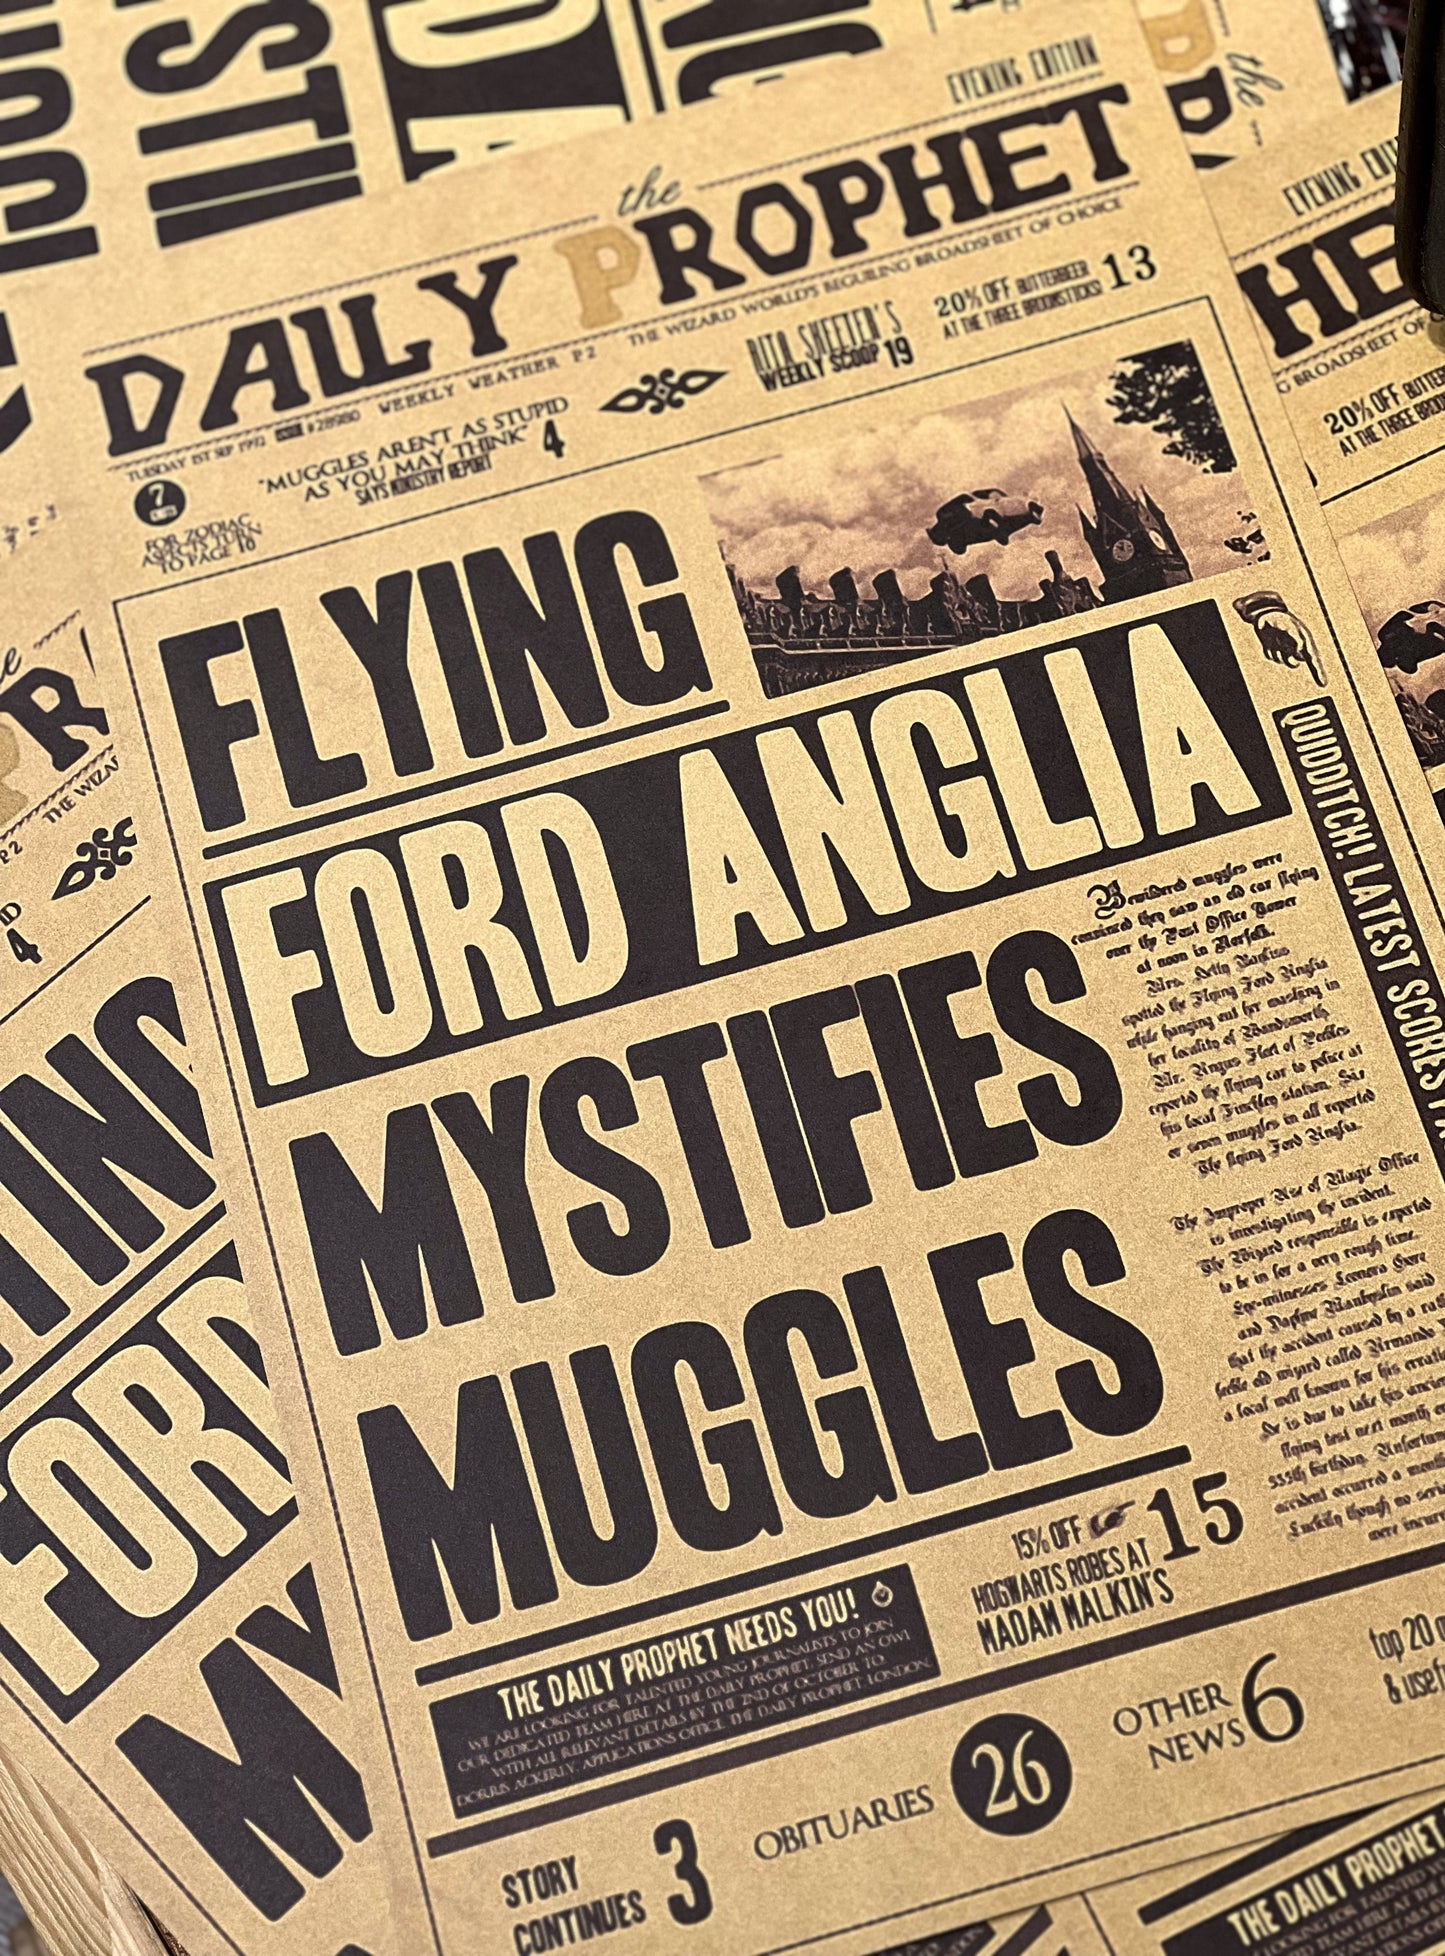 Daily Prophet: Flying Ford Anglia Surprises the Muggles